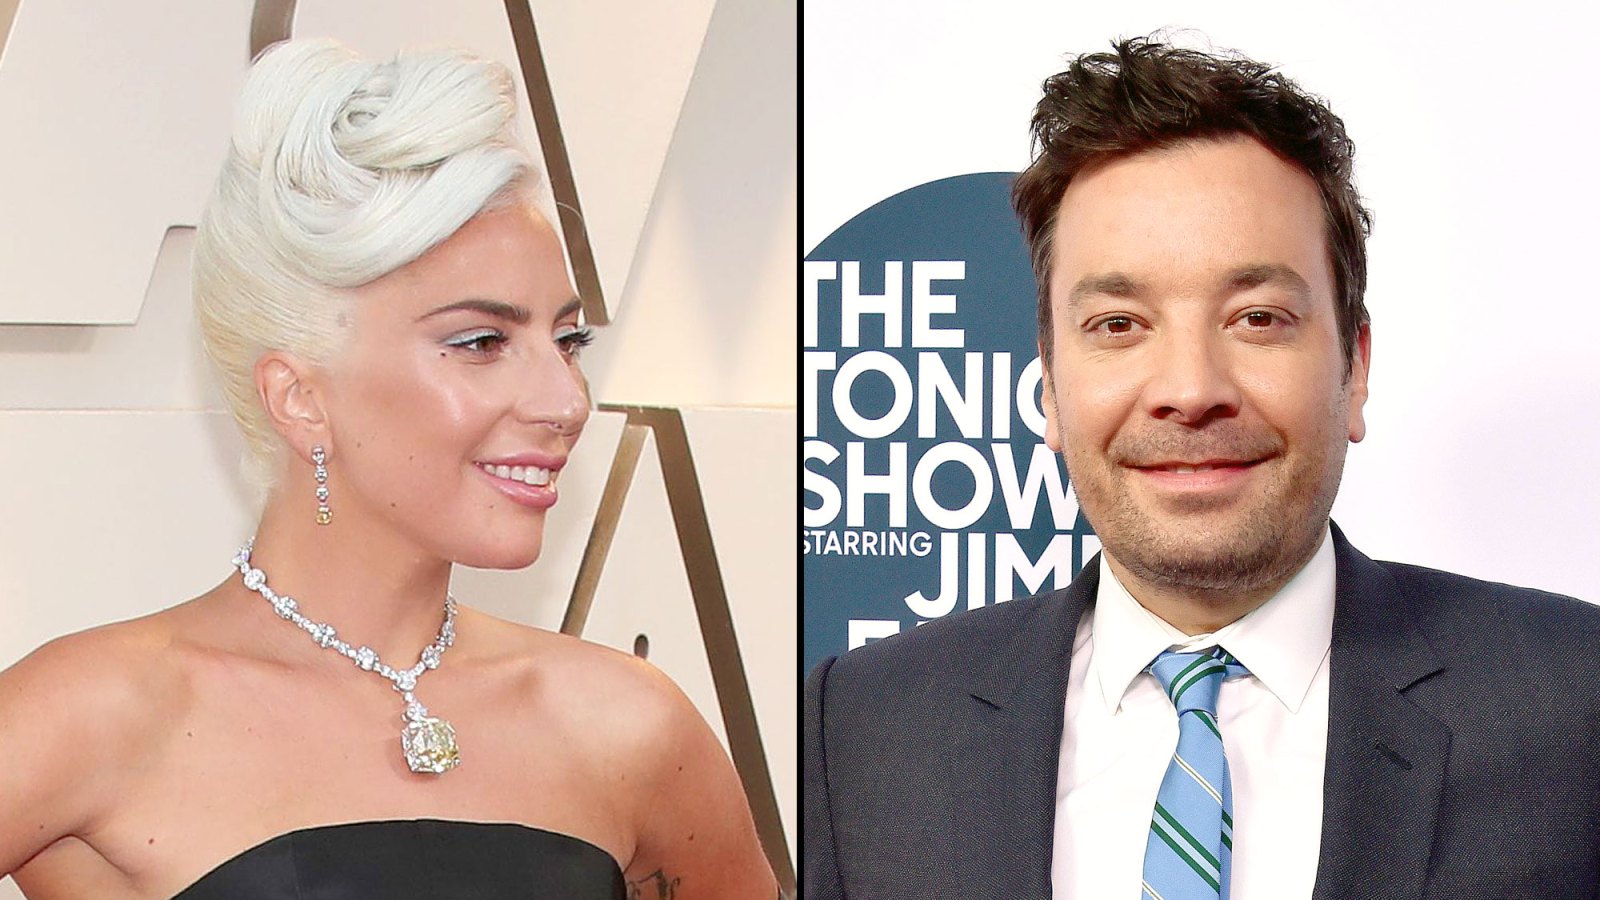 Lady Gaga Apologizes to Jimmy Fallon After Awkward Tonight Show Interview